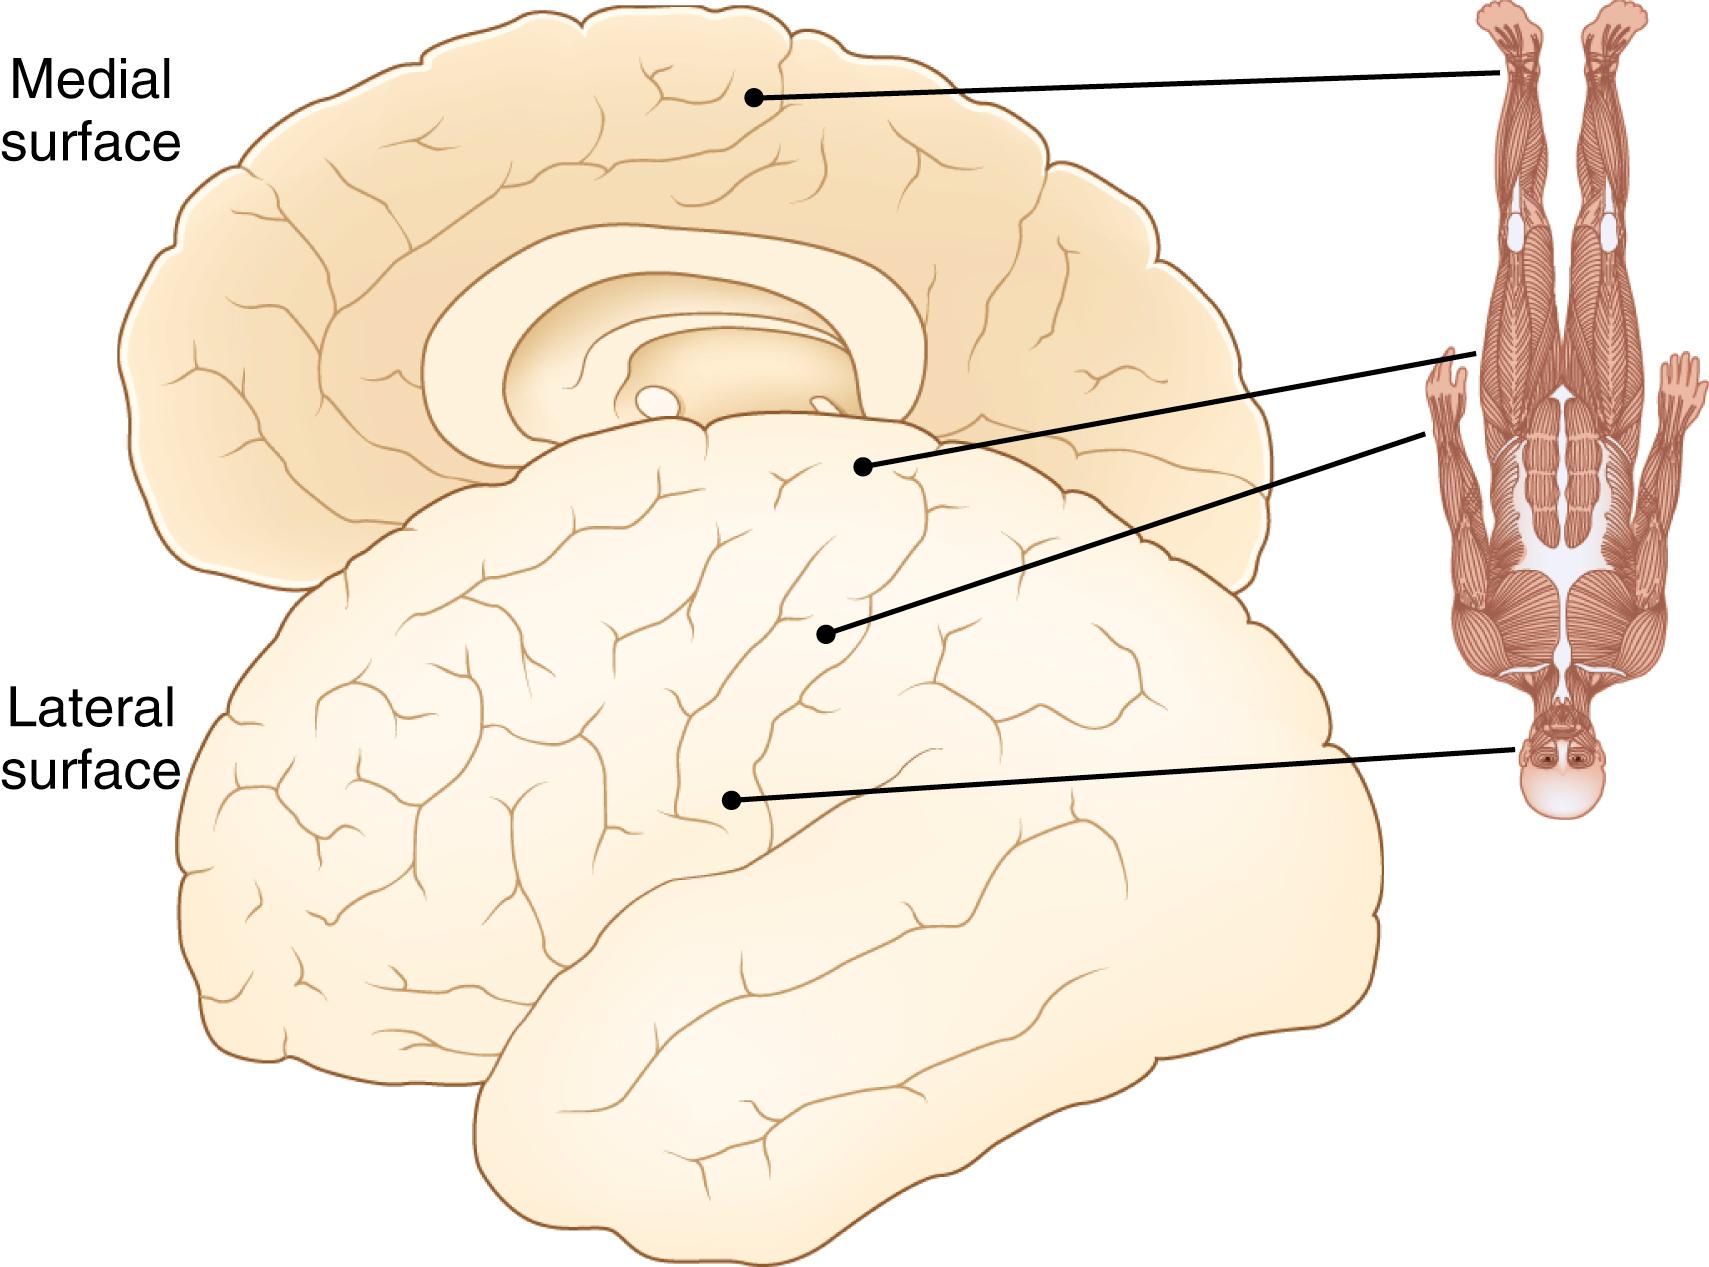 Fig. 26.1, Representation of the body on the Motor Cortex. Face and arms are represented laterally, and legs are represented medially, with cortical representation of the distal legs bordering on the central sulcus.